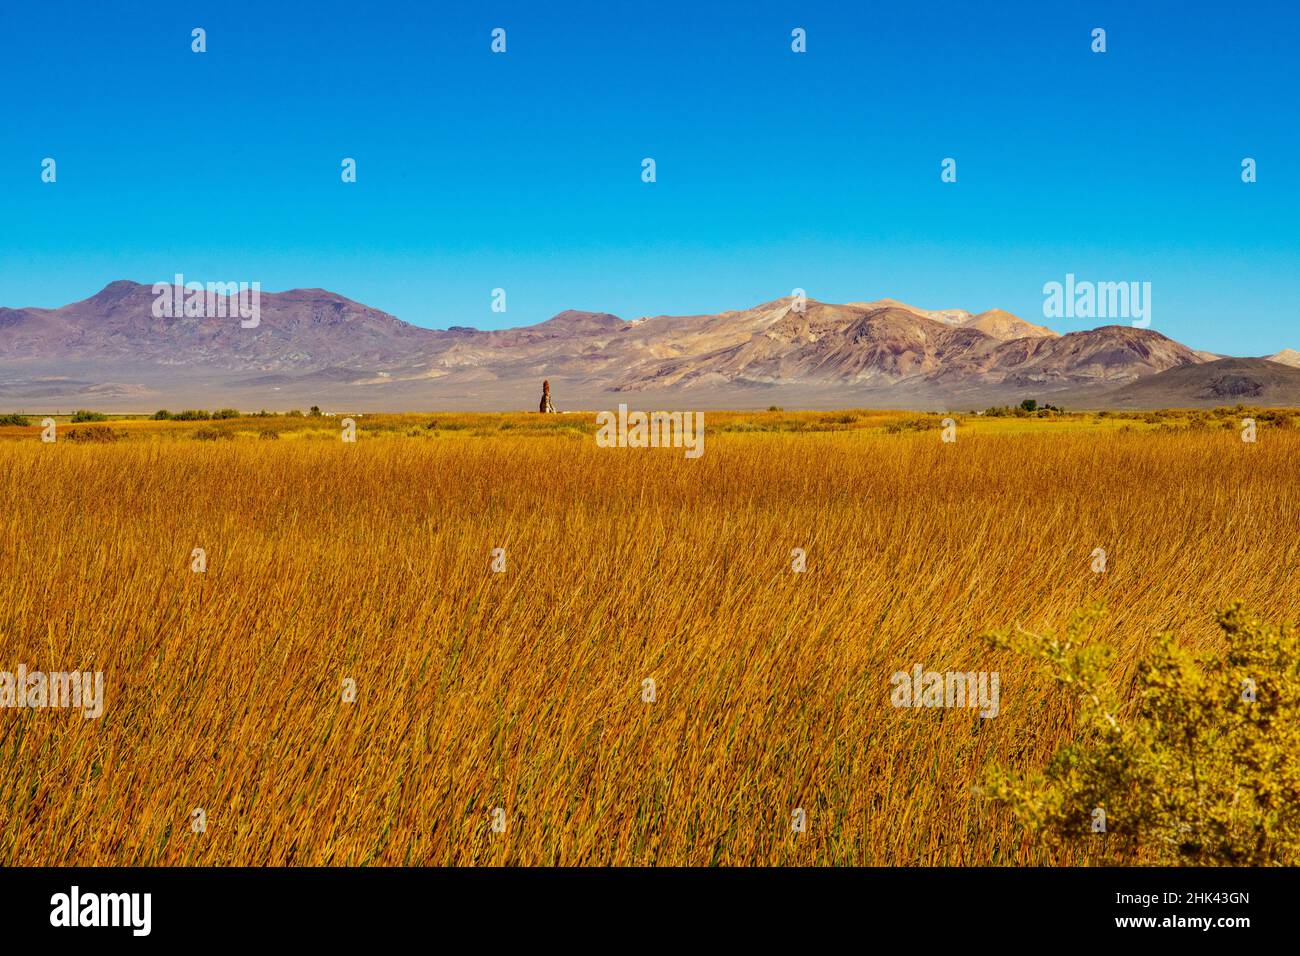 USA, Nevada, Black Rock Desert, wetland grasses at Fly Ranch framed by Calico Hills Stock Photo